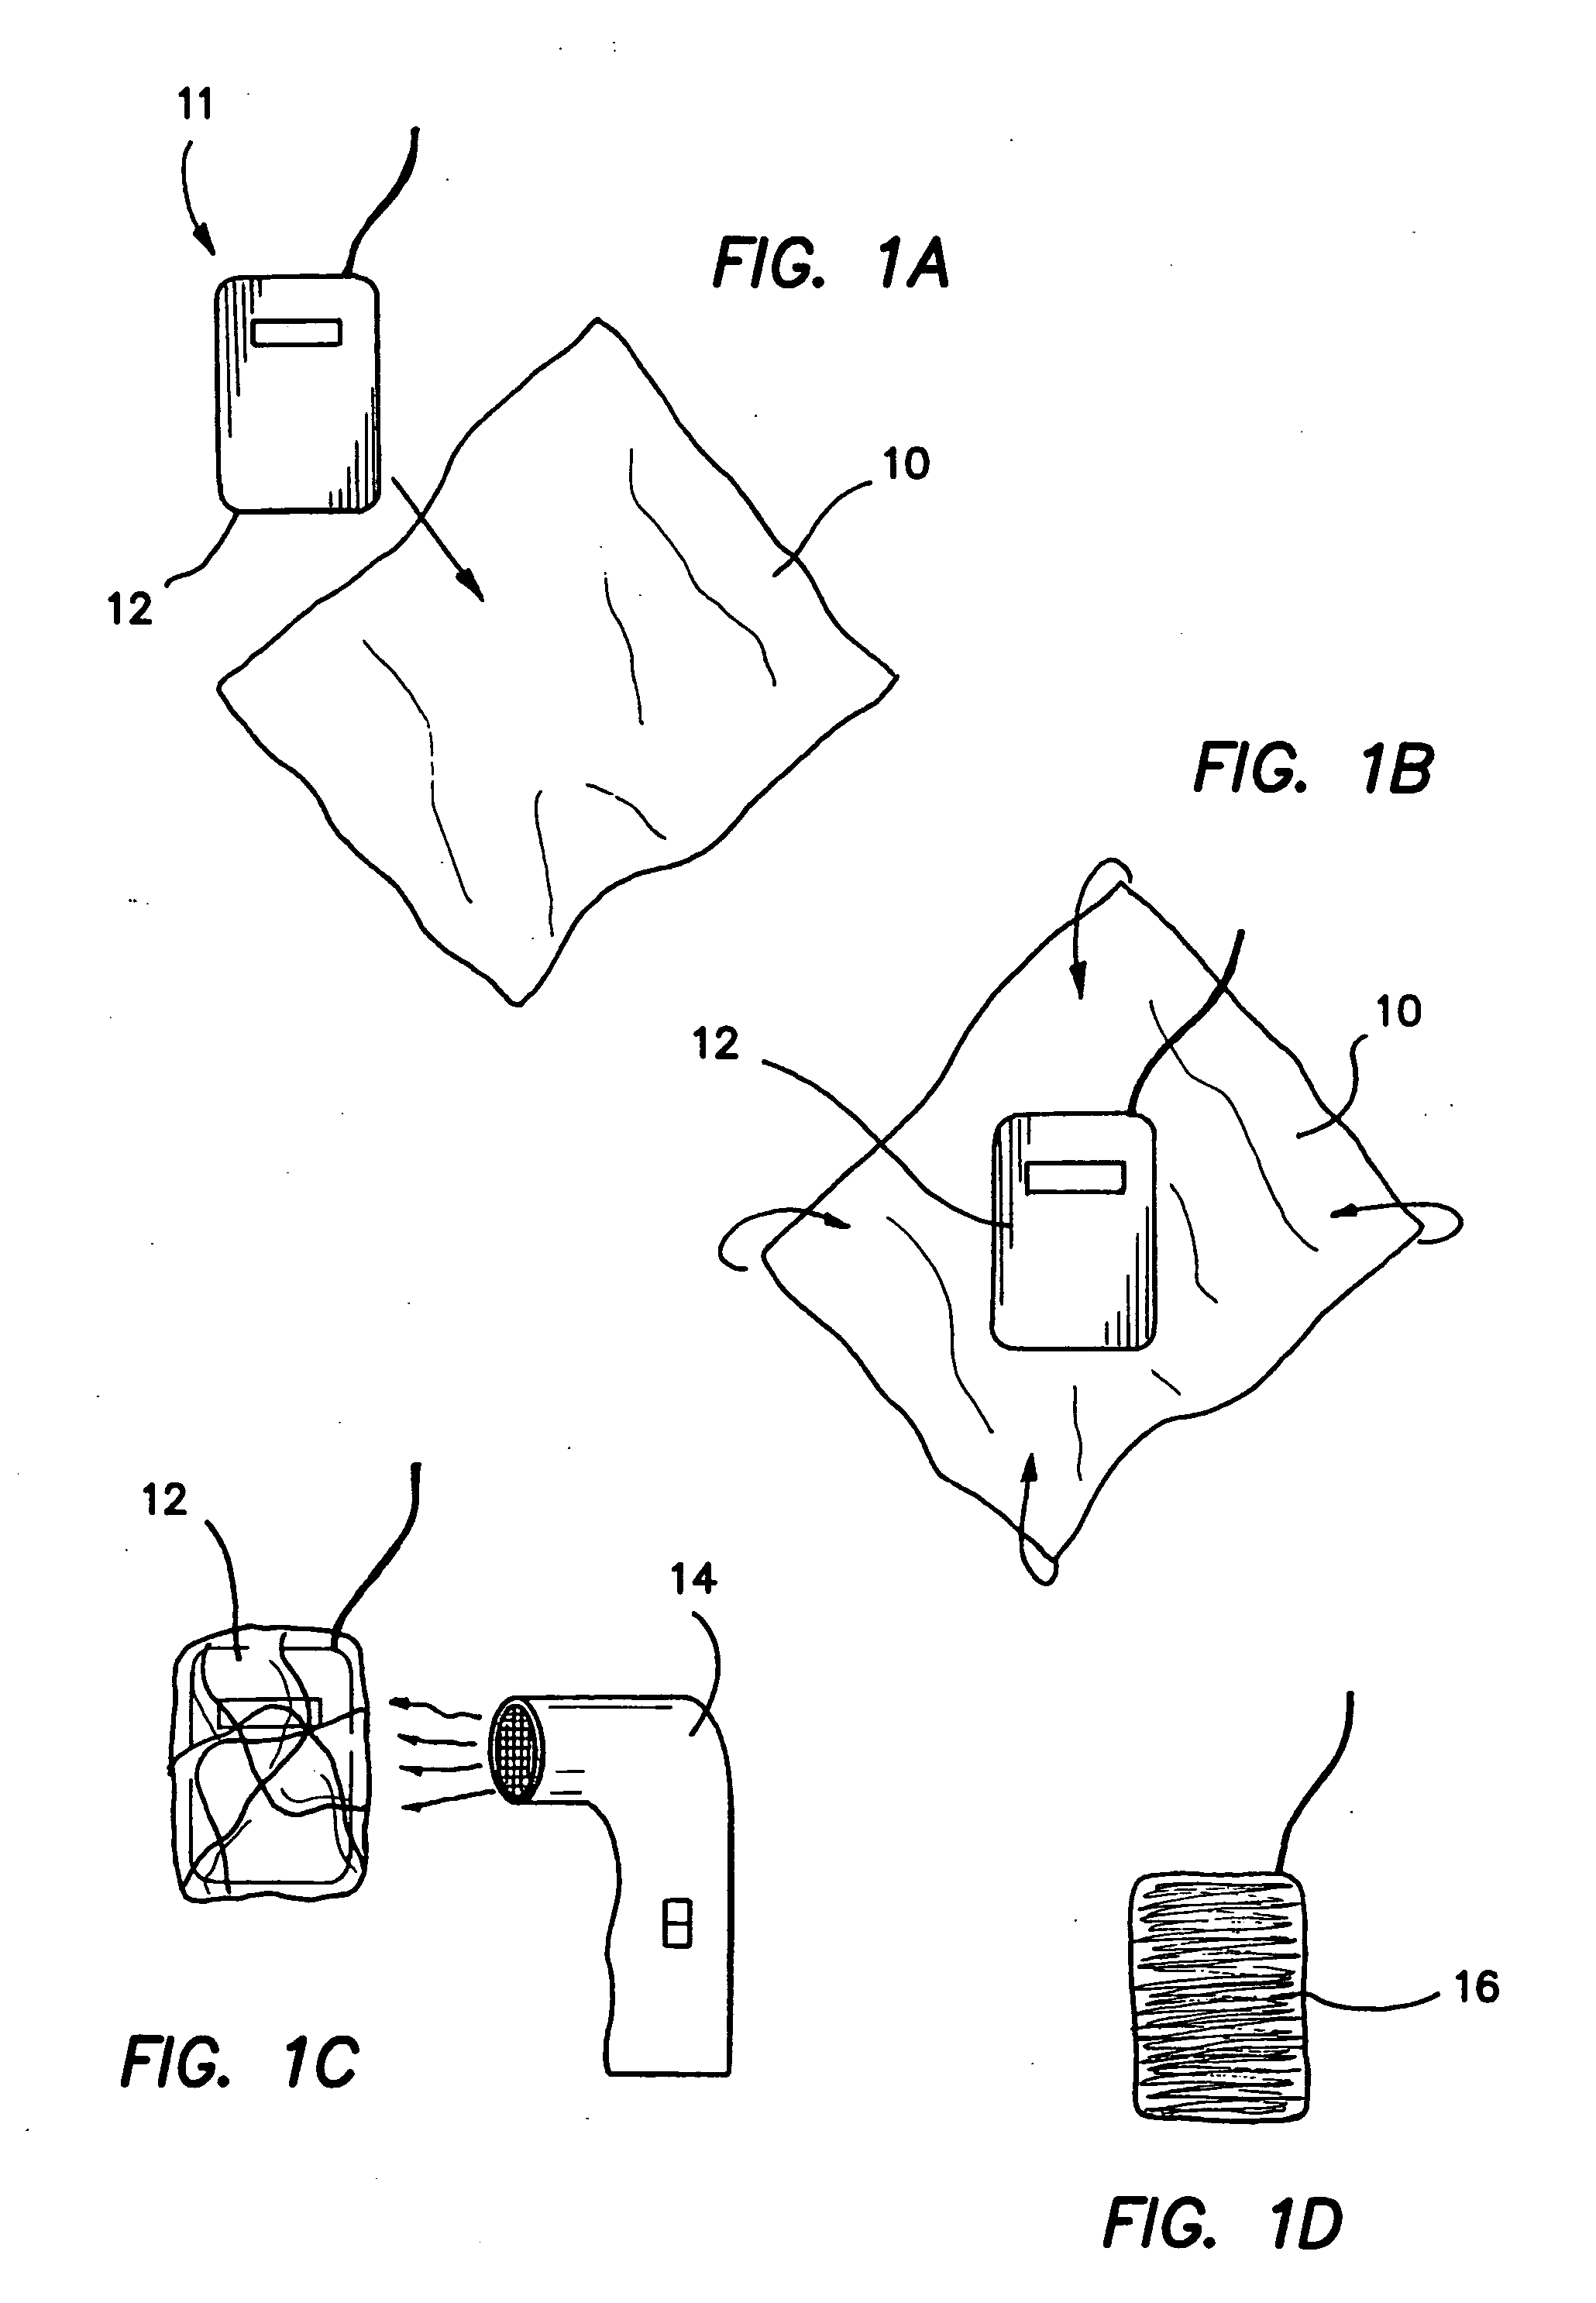 Apparatus and method for preventing adhesions between an implant and surrounding tissues